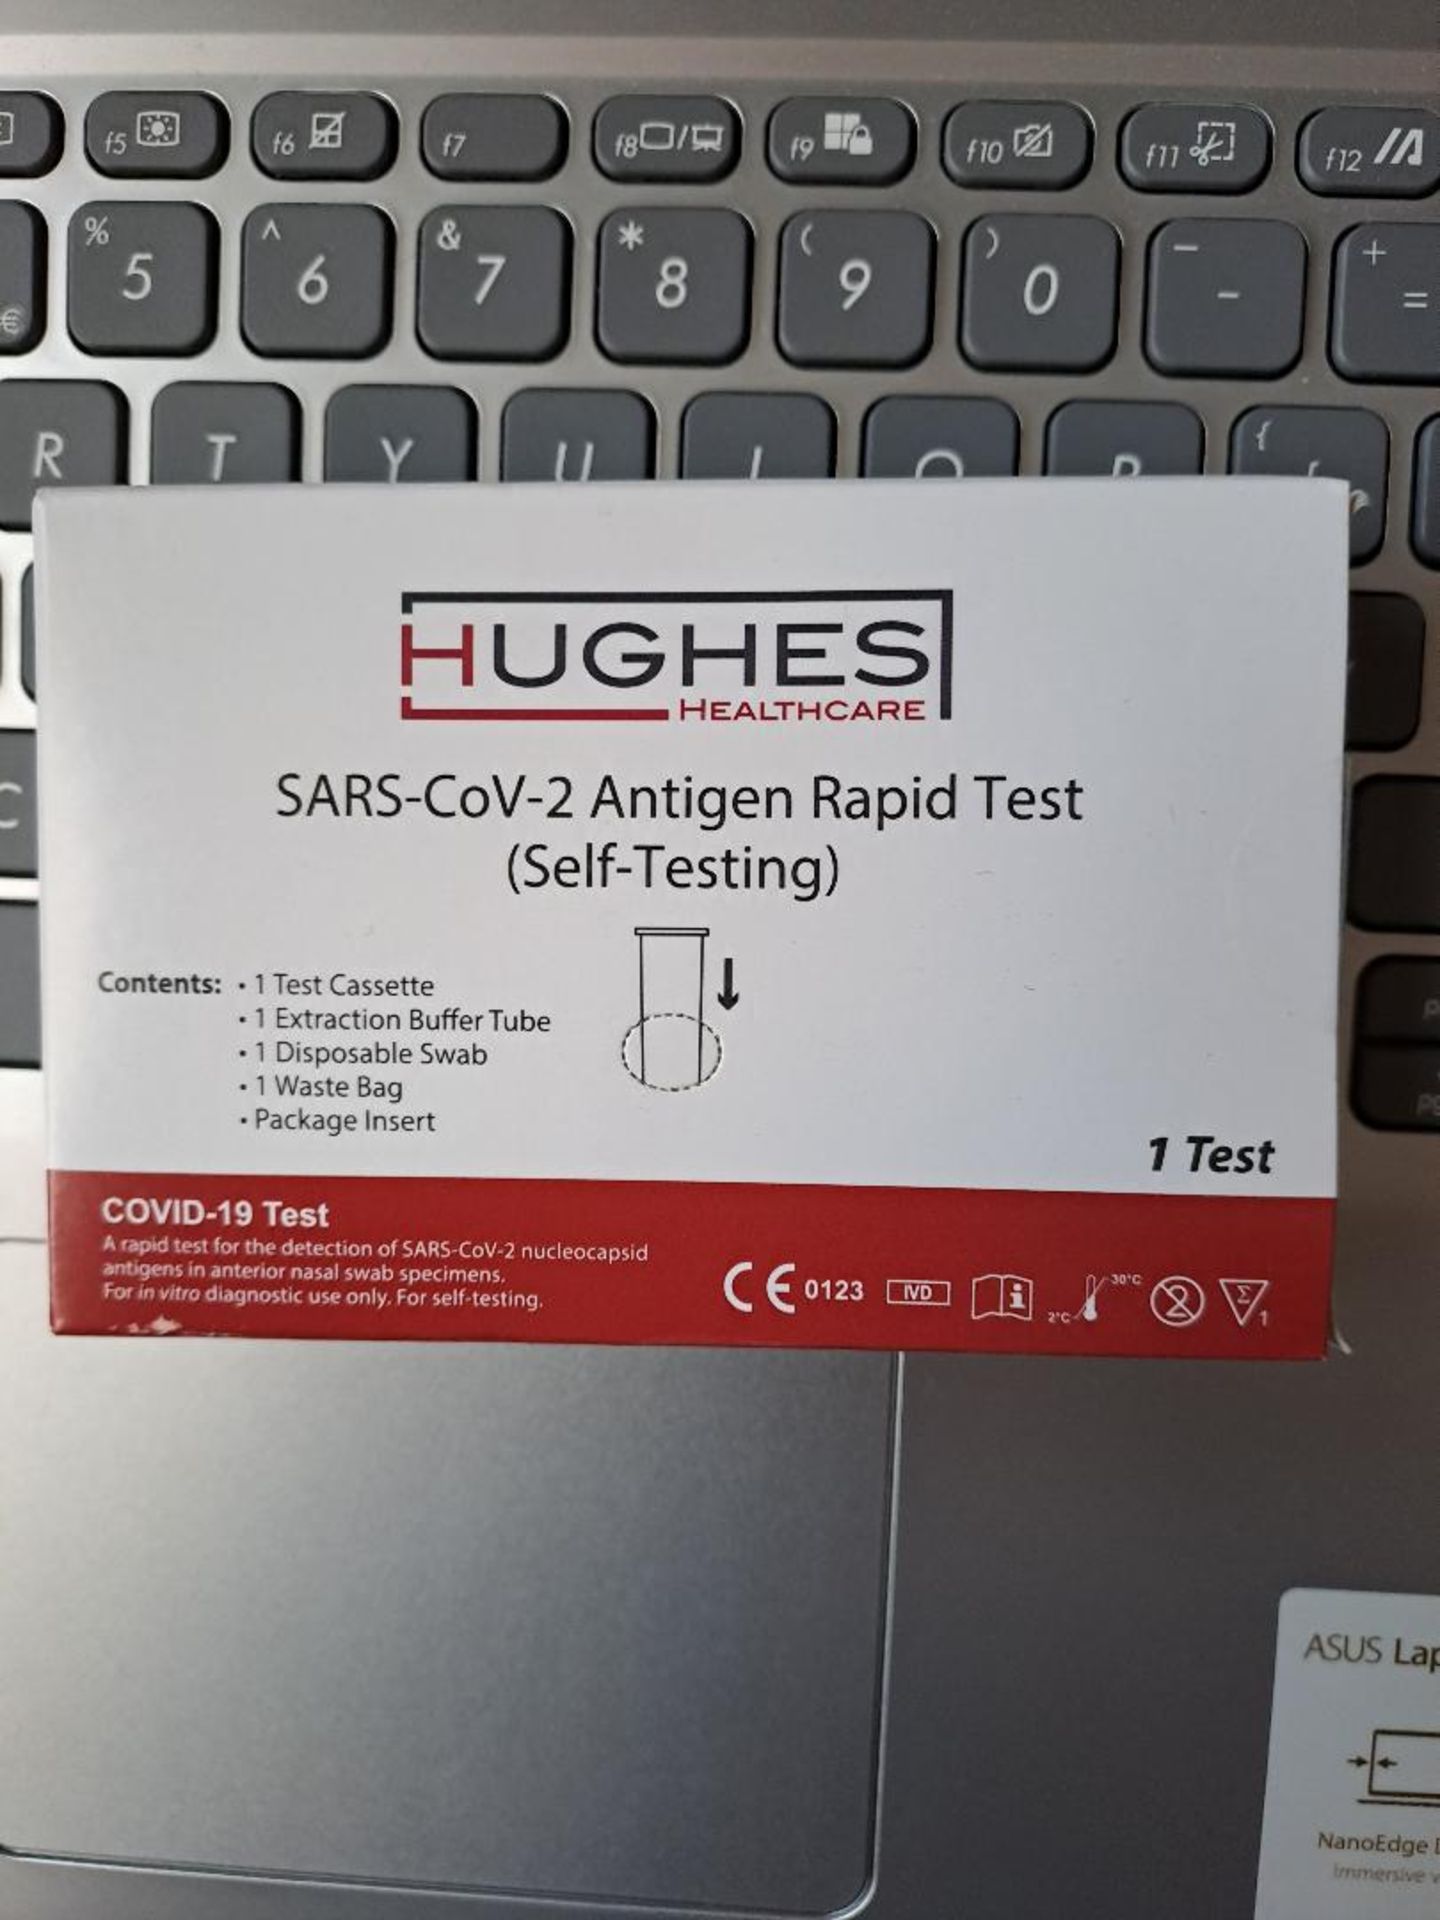 COVID TEST KITS HUGUES BRAND AND